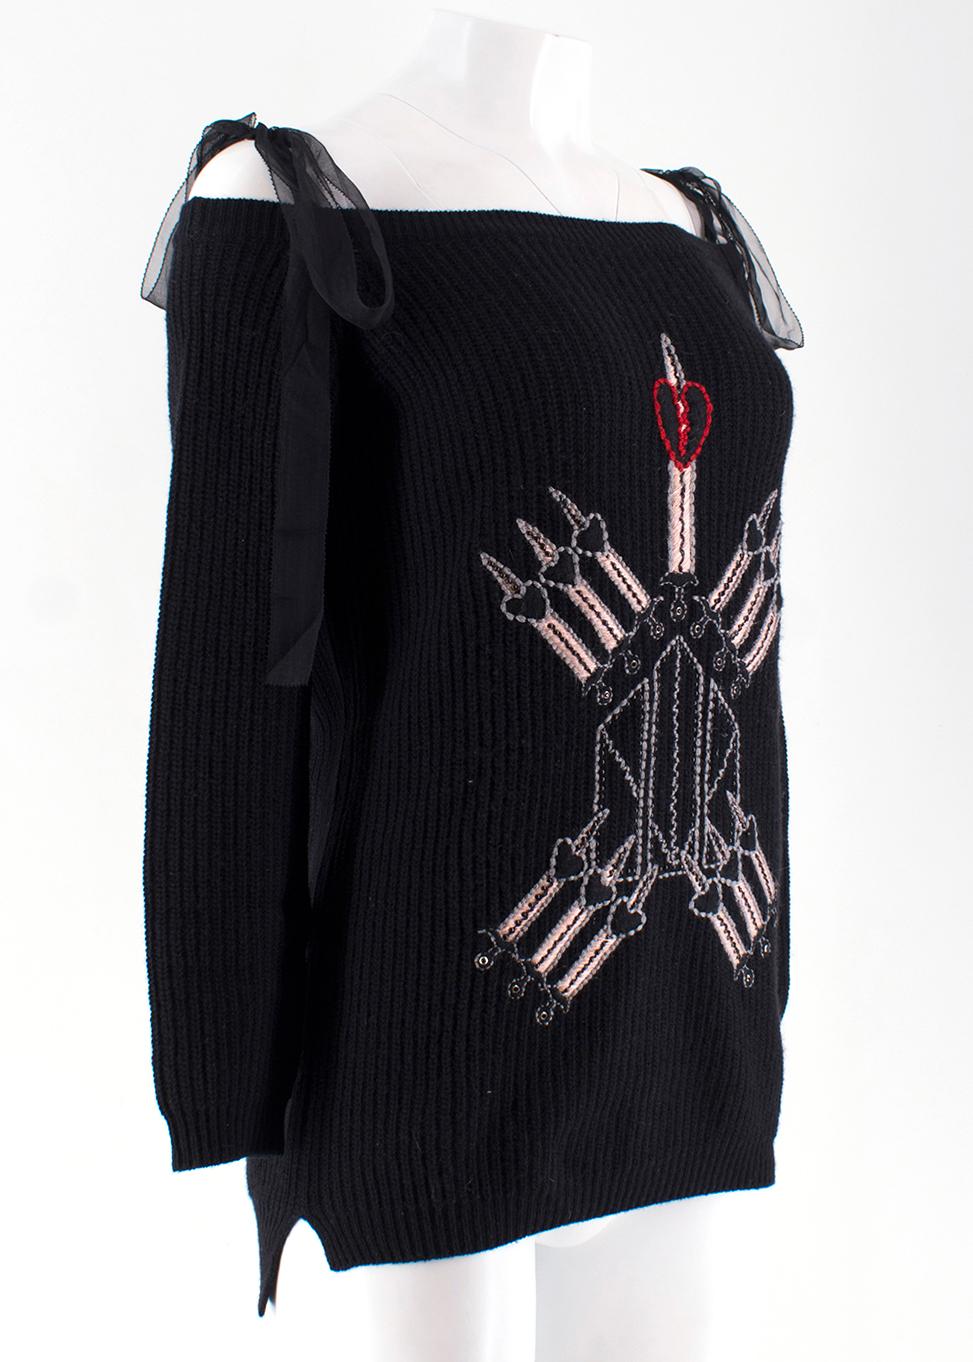 Valentino Love Blades Off-Shoulder Cashmere Blend Jumper

- Sheer ribbon ties that tie over the shoulder
- Off shoulder style jumper
- Long sleeves
- Love Blades collection embroidered motif on front with some embellishment
- Soft black ribbed knit